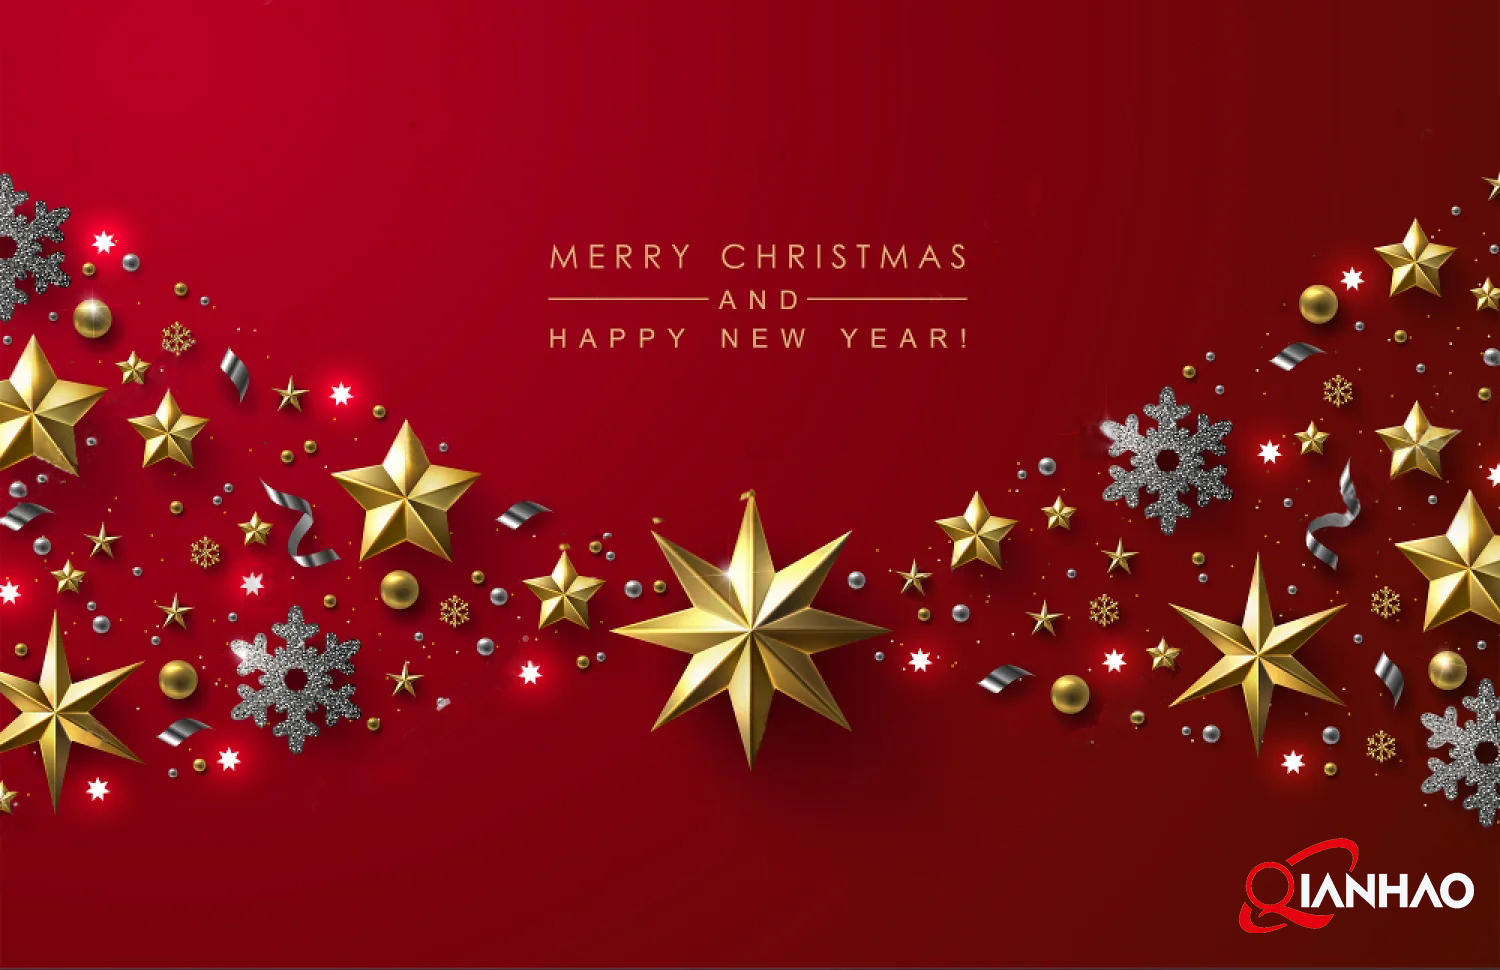 Merry Christmas from Qianhao Group !(图1)